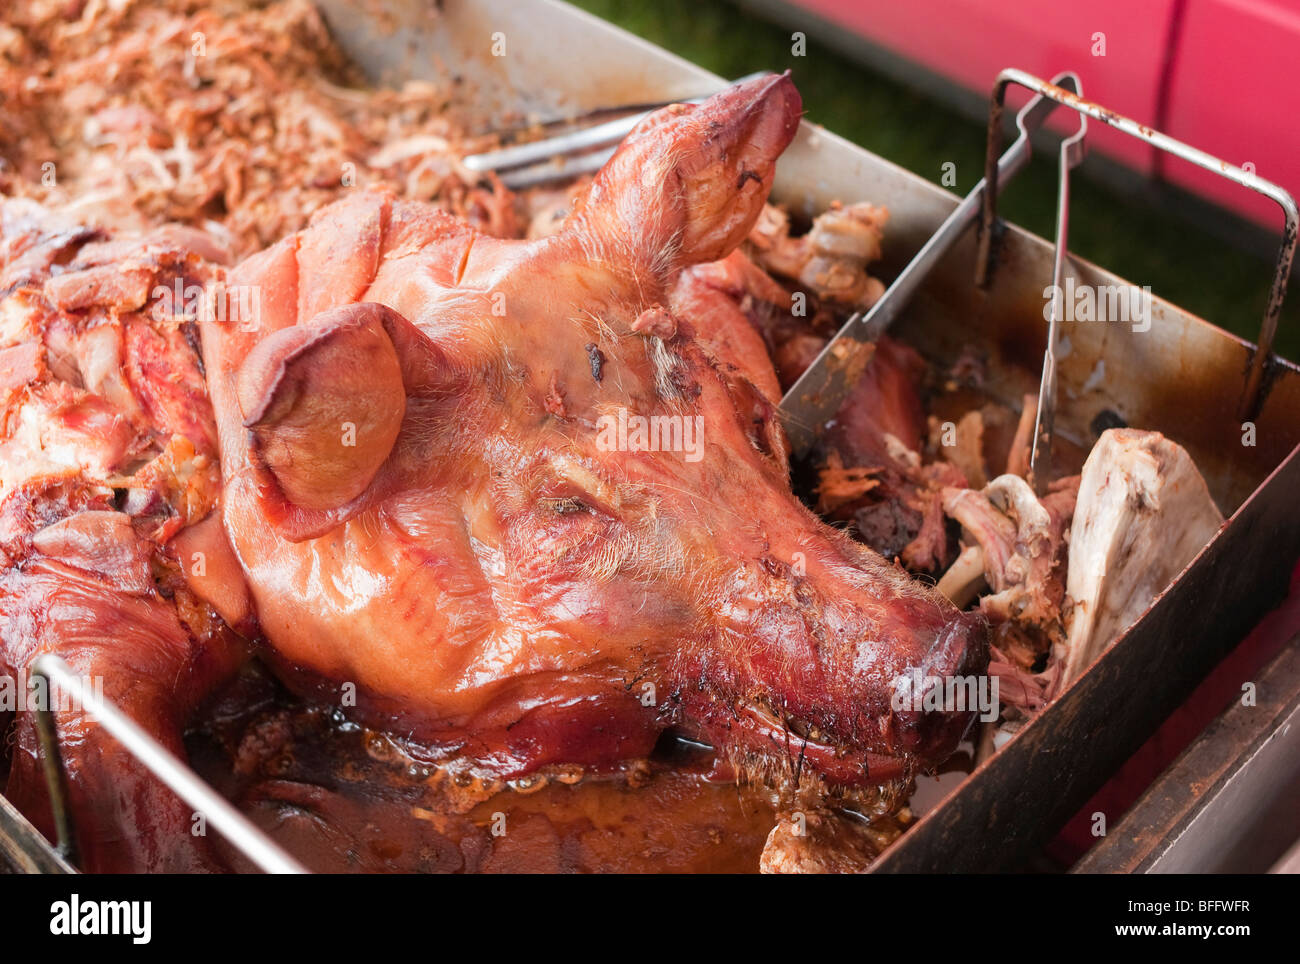 Pig's head roasted on spit Stock Photo